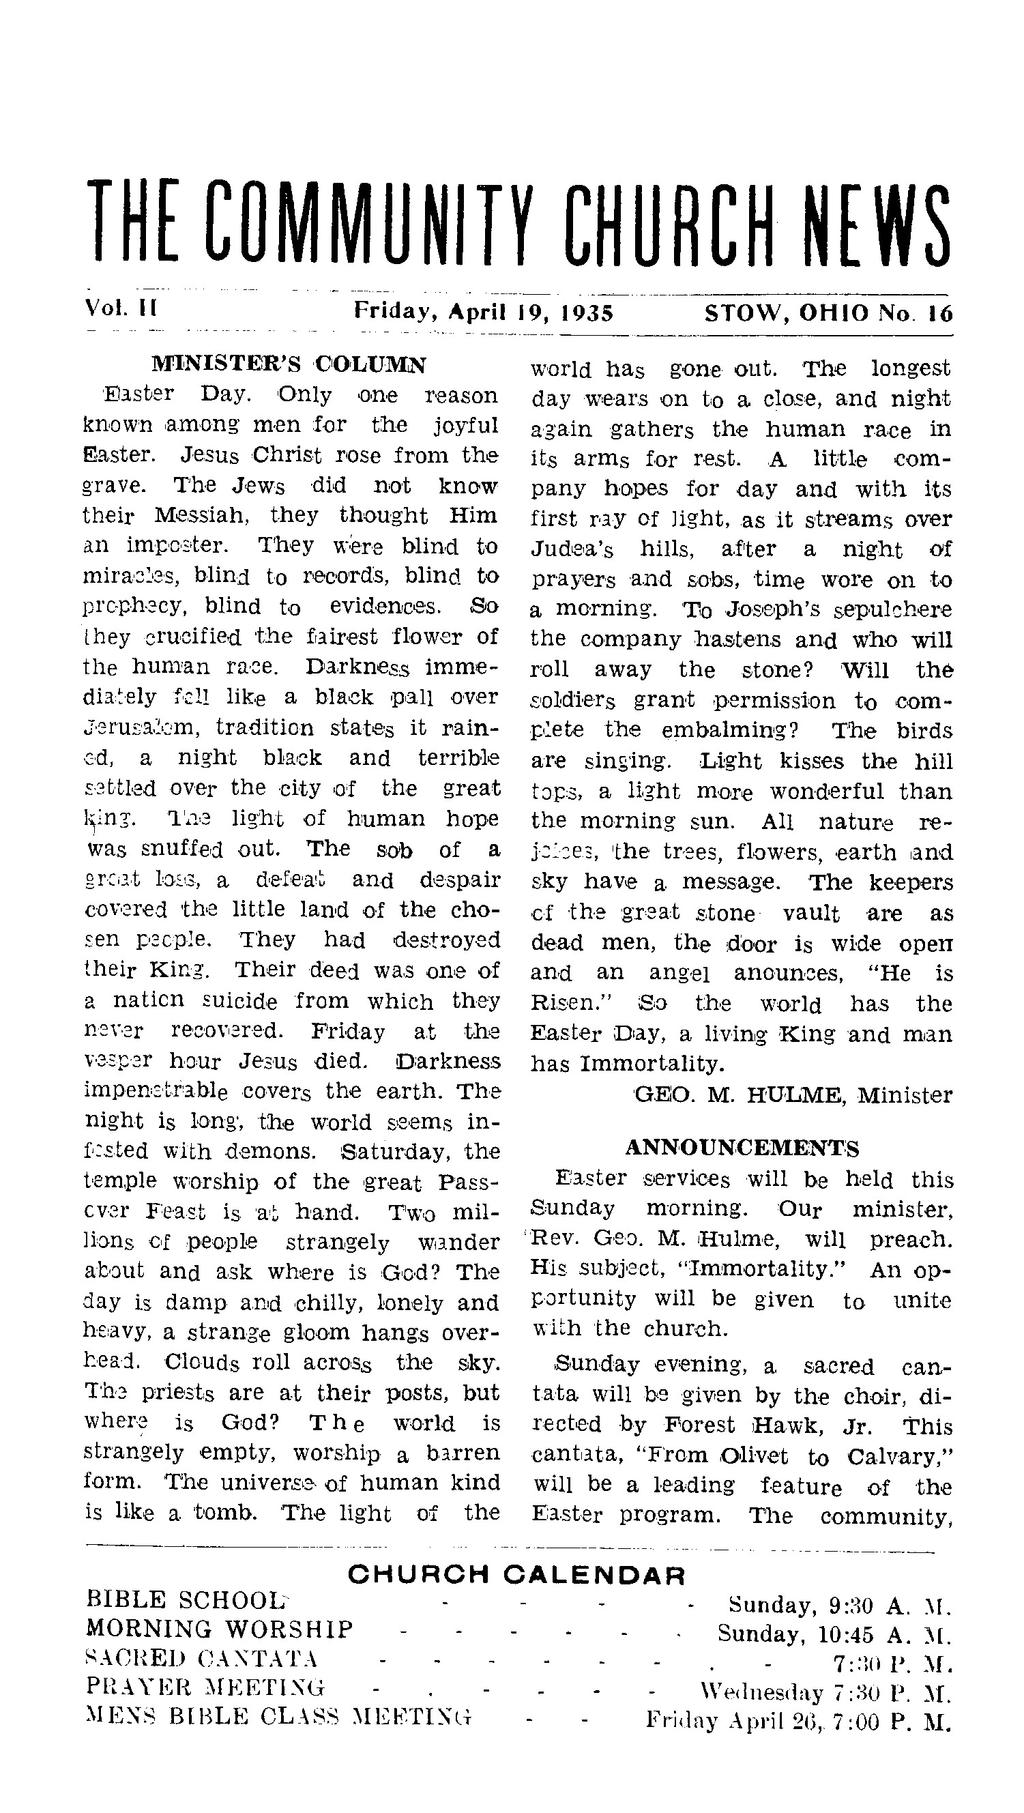 THE COMMUNITY CHURCH NEWS Vol. II Friday, April 19, 1935 STOW, OHIO No 16 MINISTER'S COLUMN Easter Day. Only one reason known among' men for the joyful Easter. Jesus Christ rose from the grave.